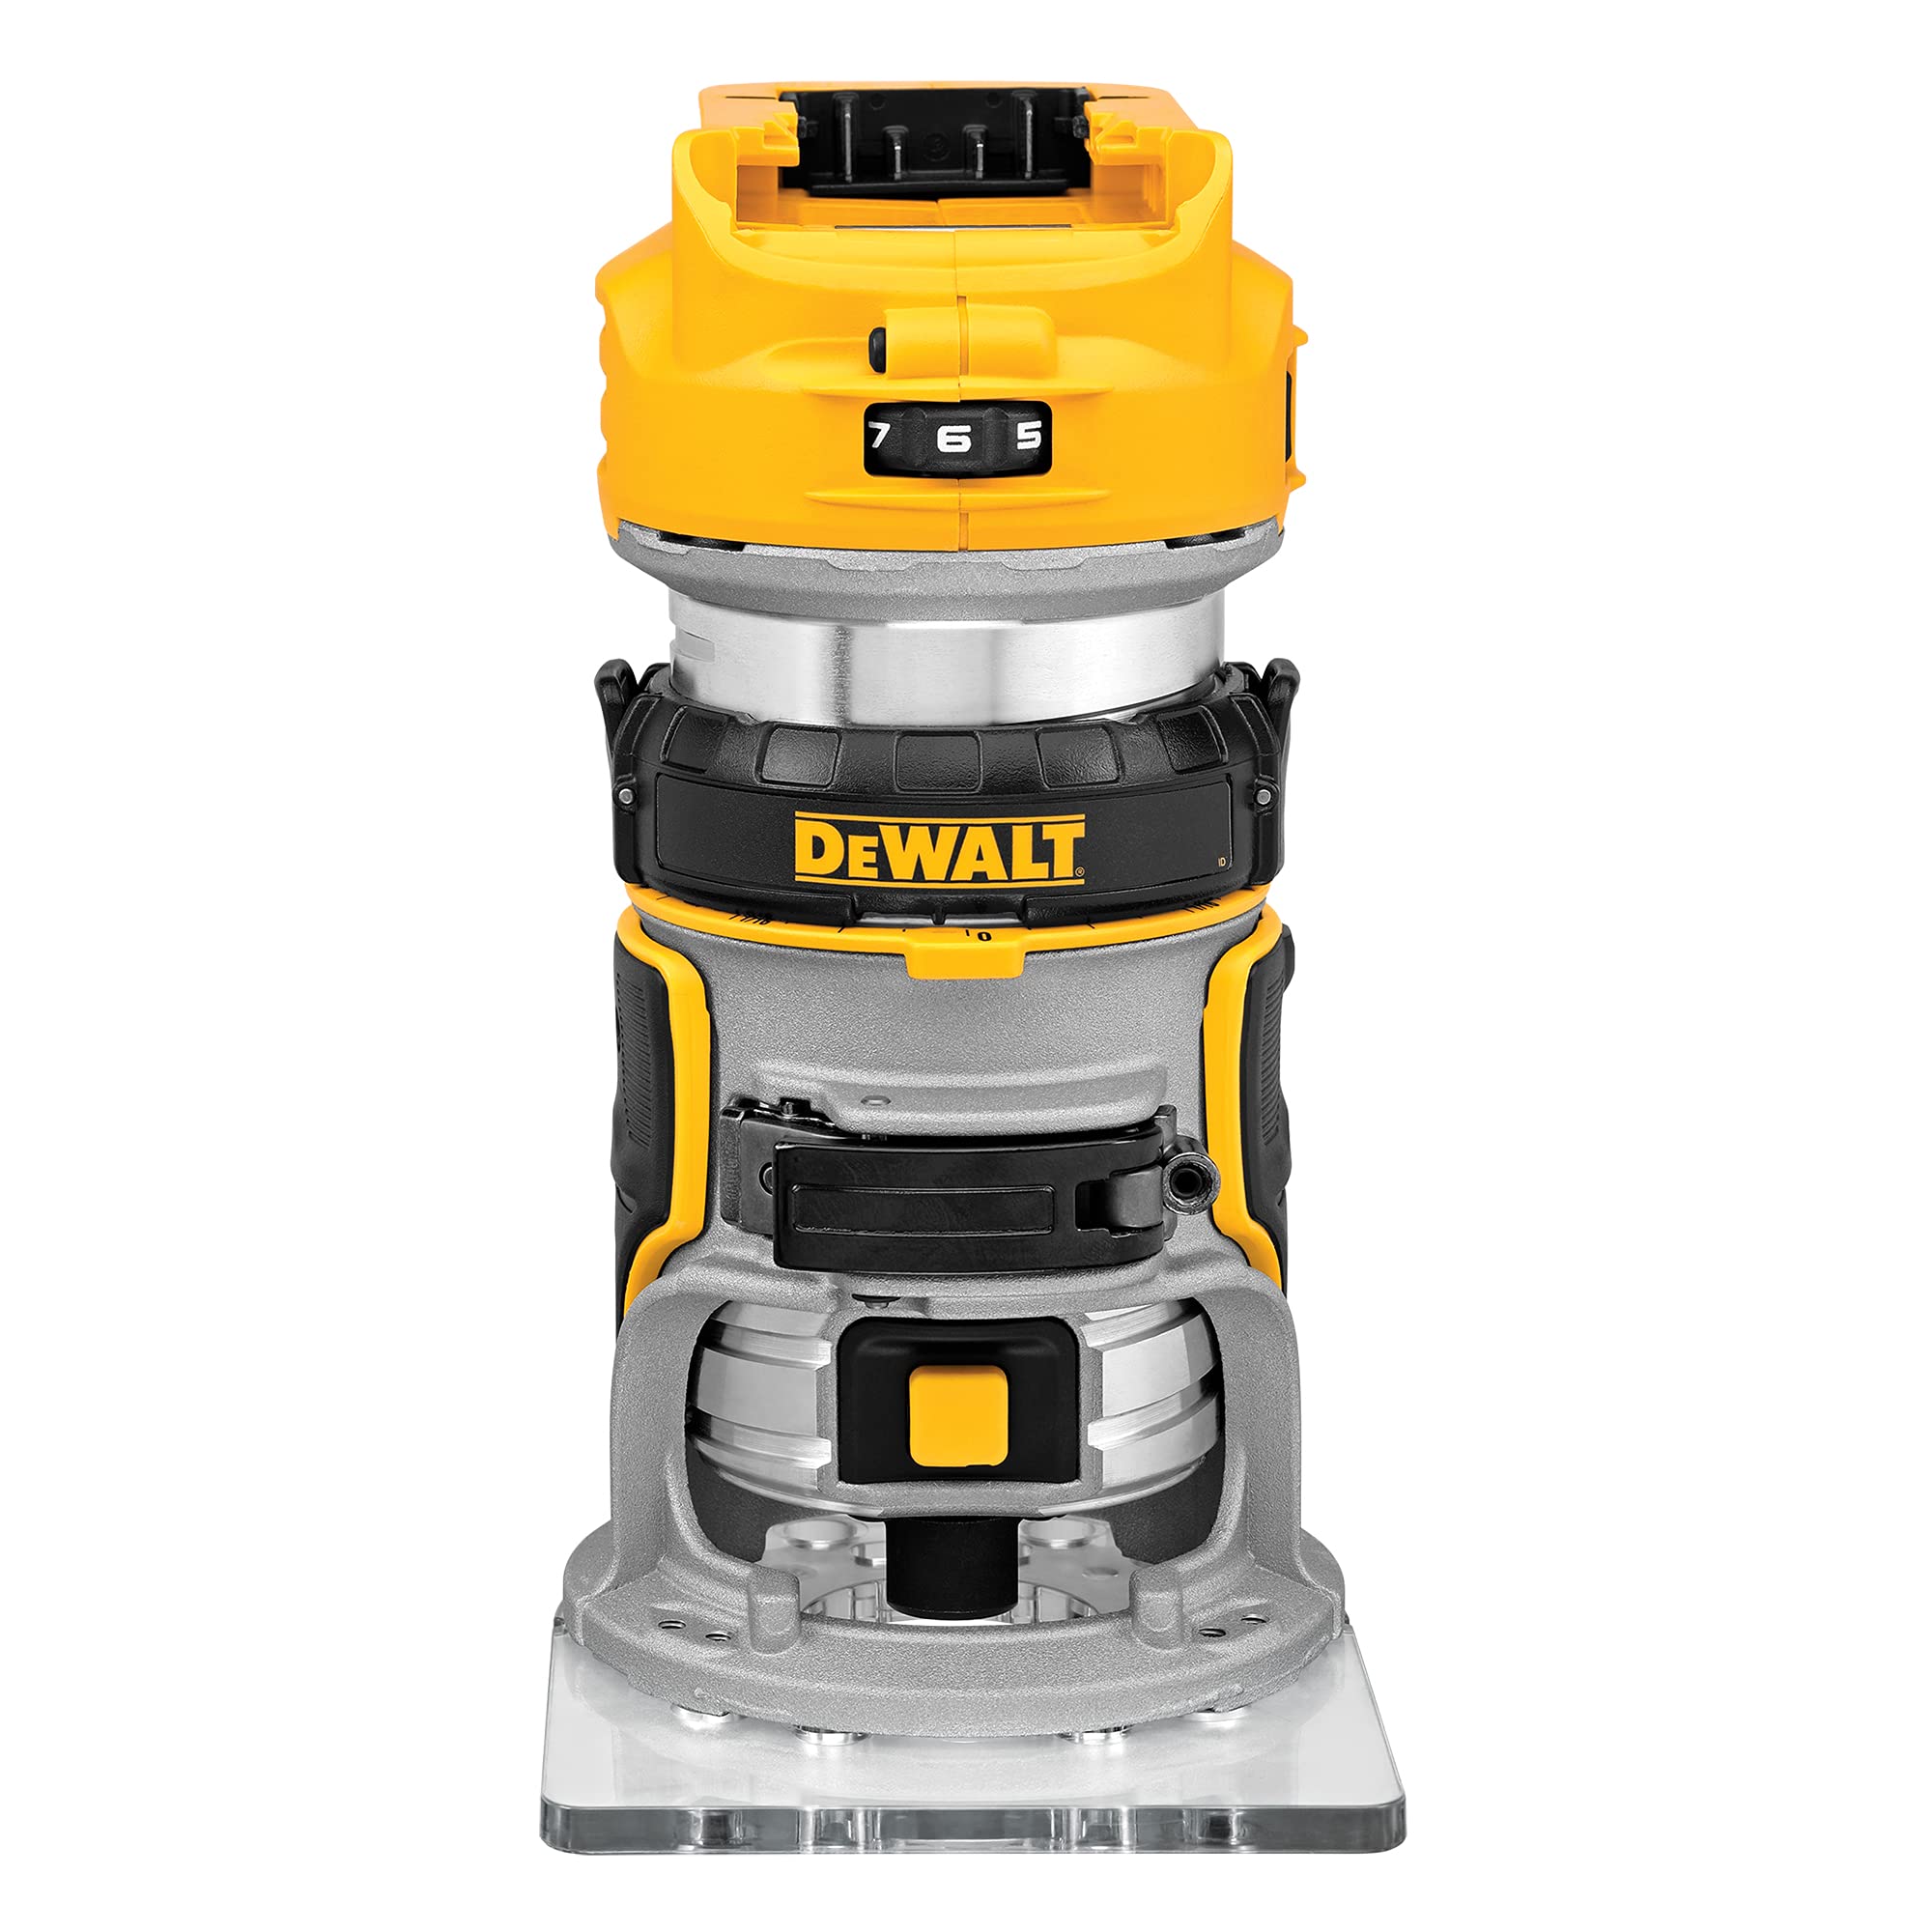 DEWALT 20V Max XR Cordless Router, Brushless, Tool Only $139.99 at Industrial Tools via Amazon